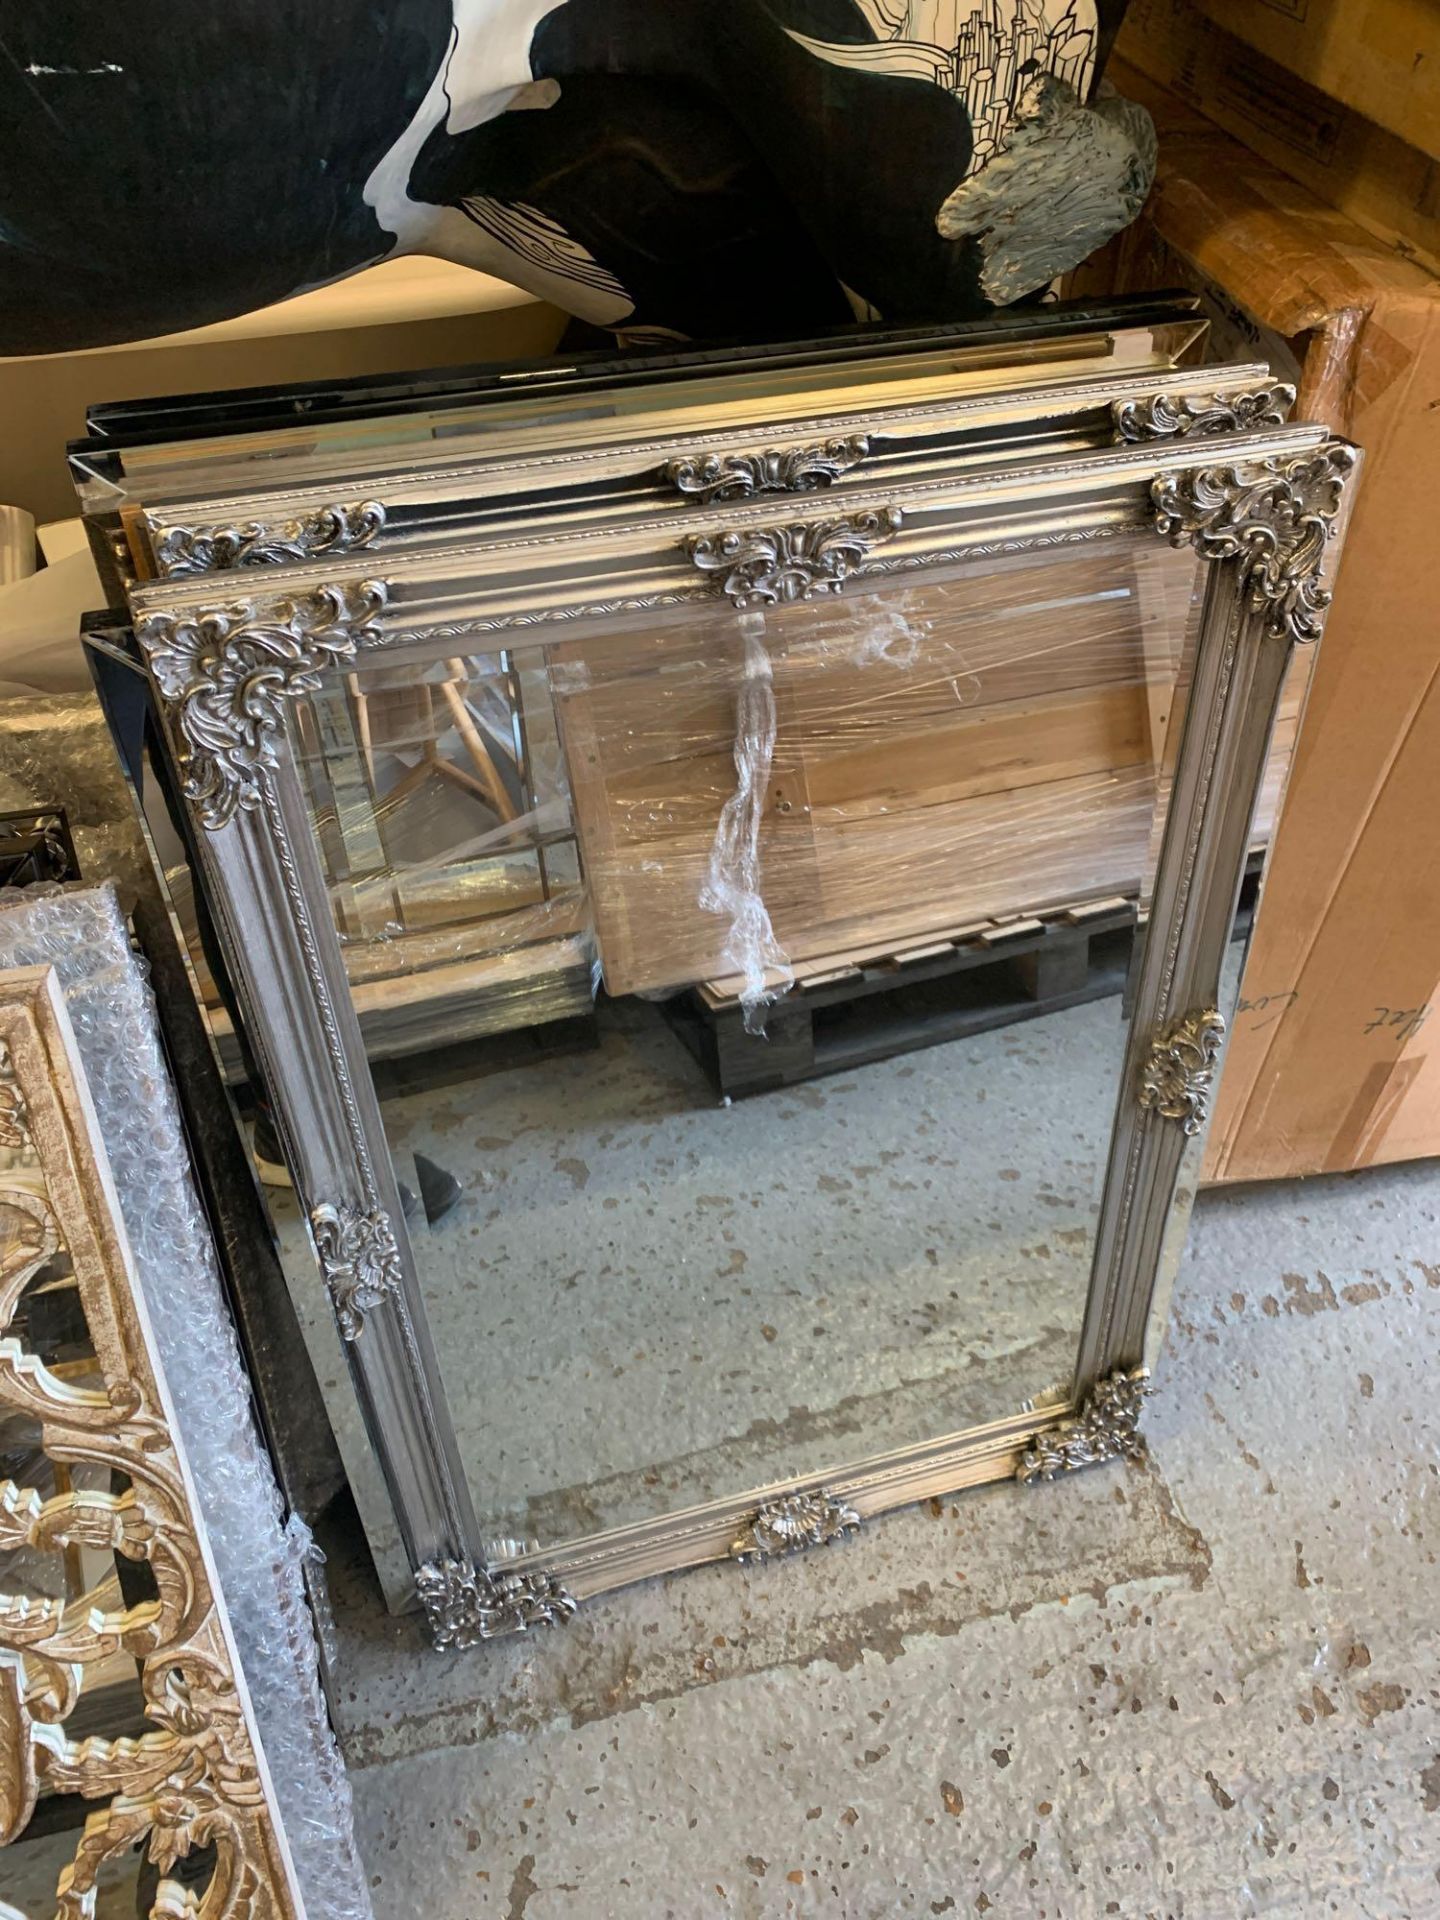 Fiennes Rectangle Mirror Silver 610 X 920mm This Vintage Inspired Piece Rectangle Mirror With Its - Image 2 of 4